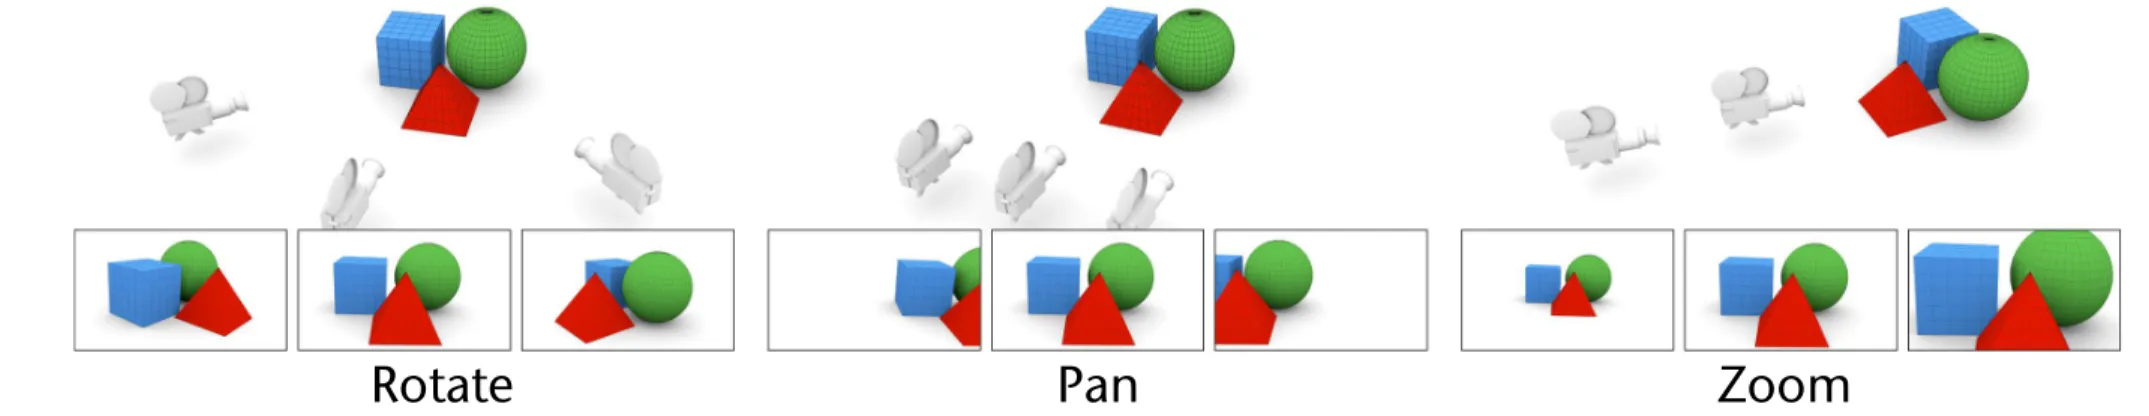 Figure 2: Rotating, panning, and zooming are the primary camera movements used in almost every 3D modelling environments.